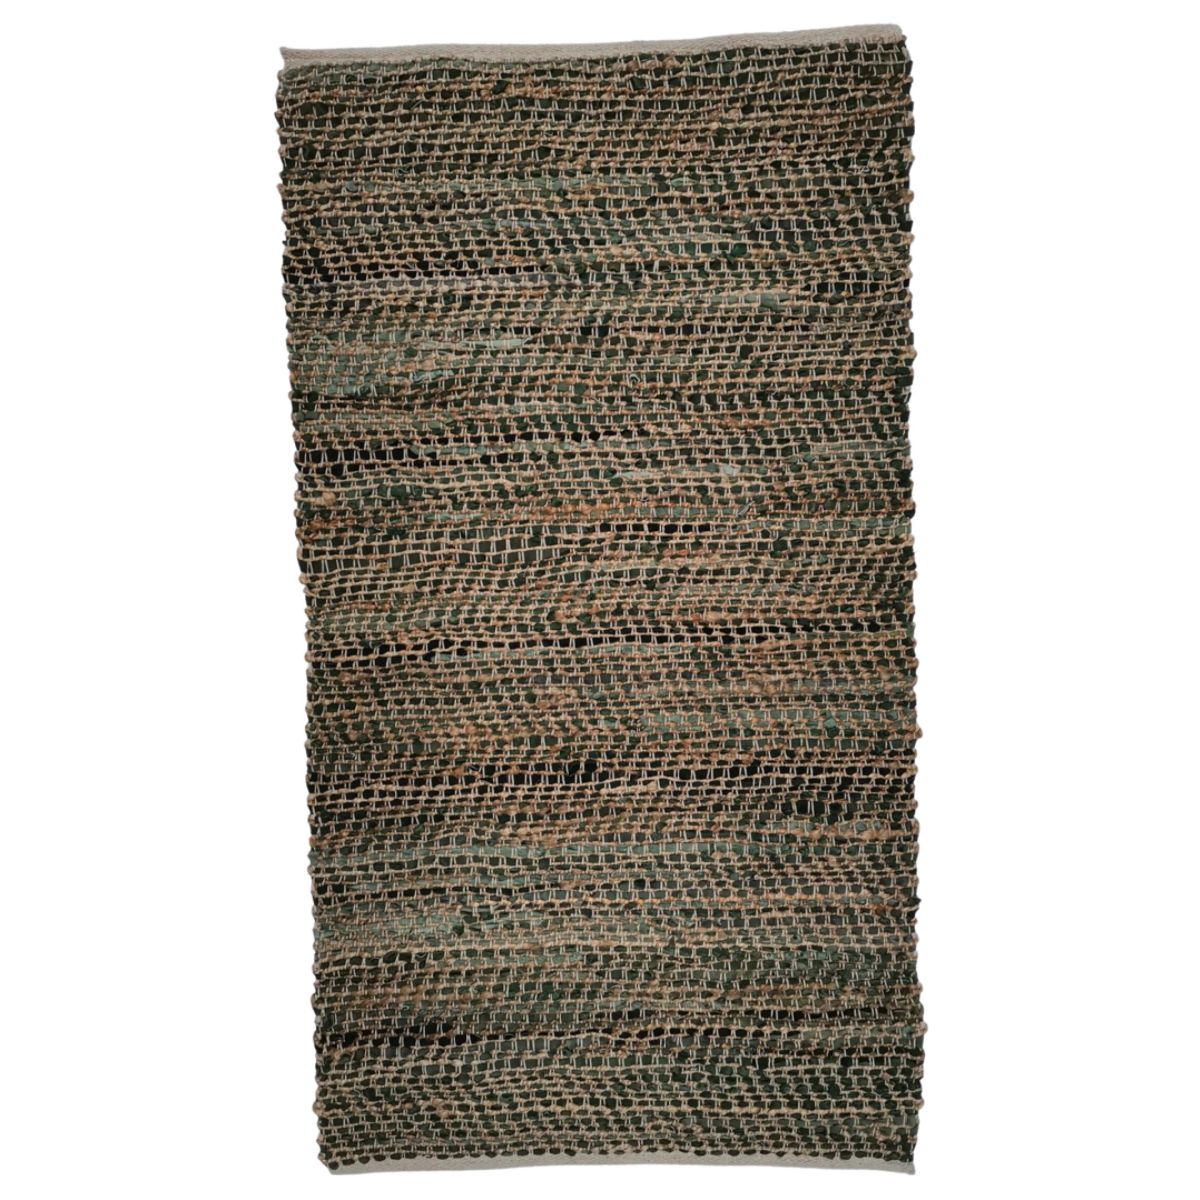 rug recycled leather and jute woven mix forestgreen 80x140cm